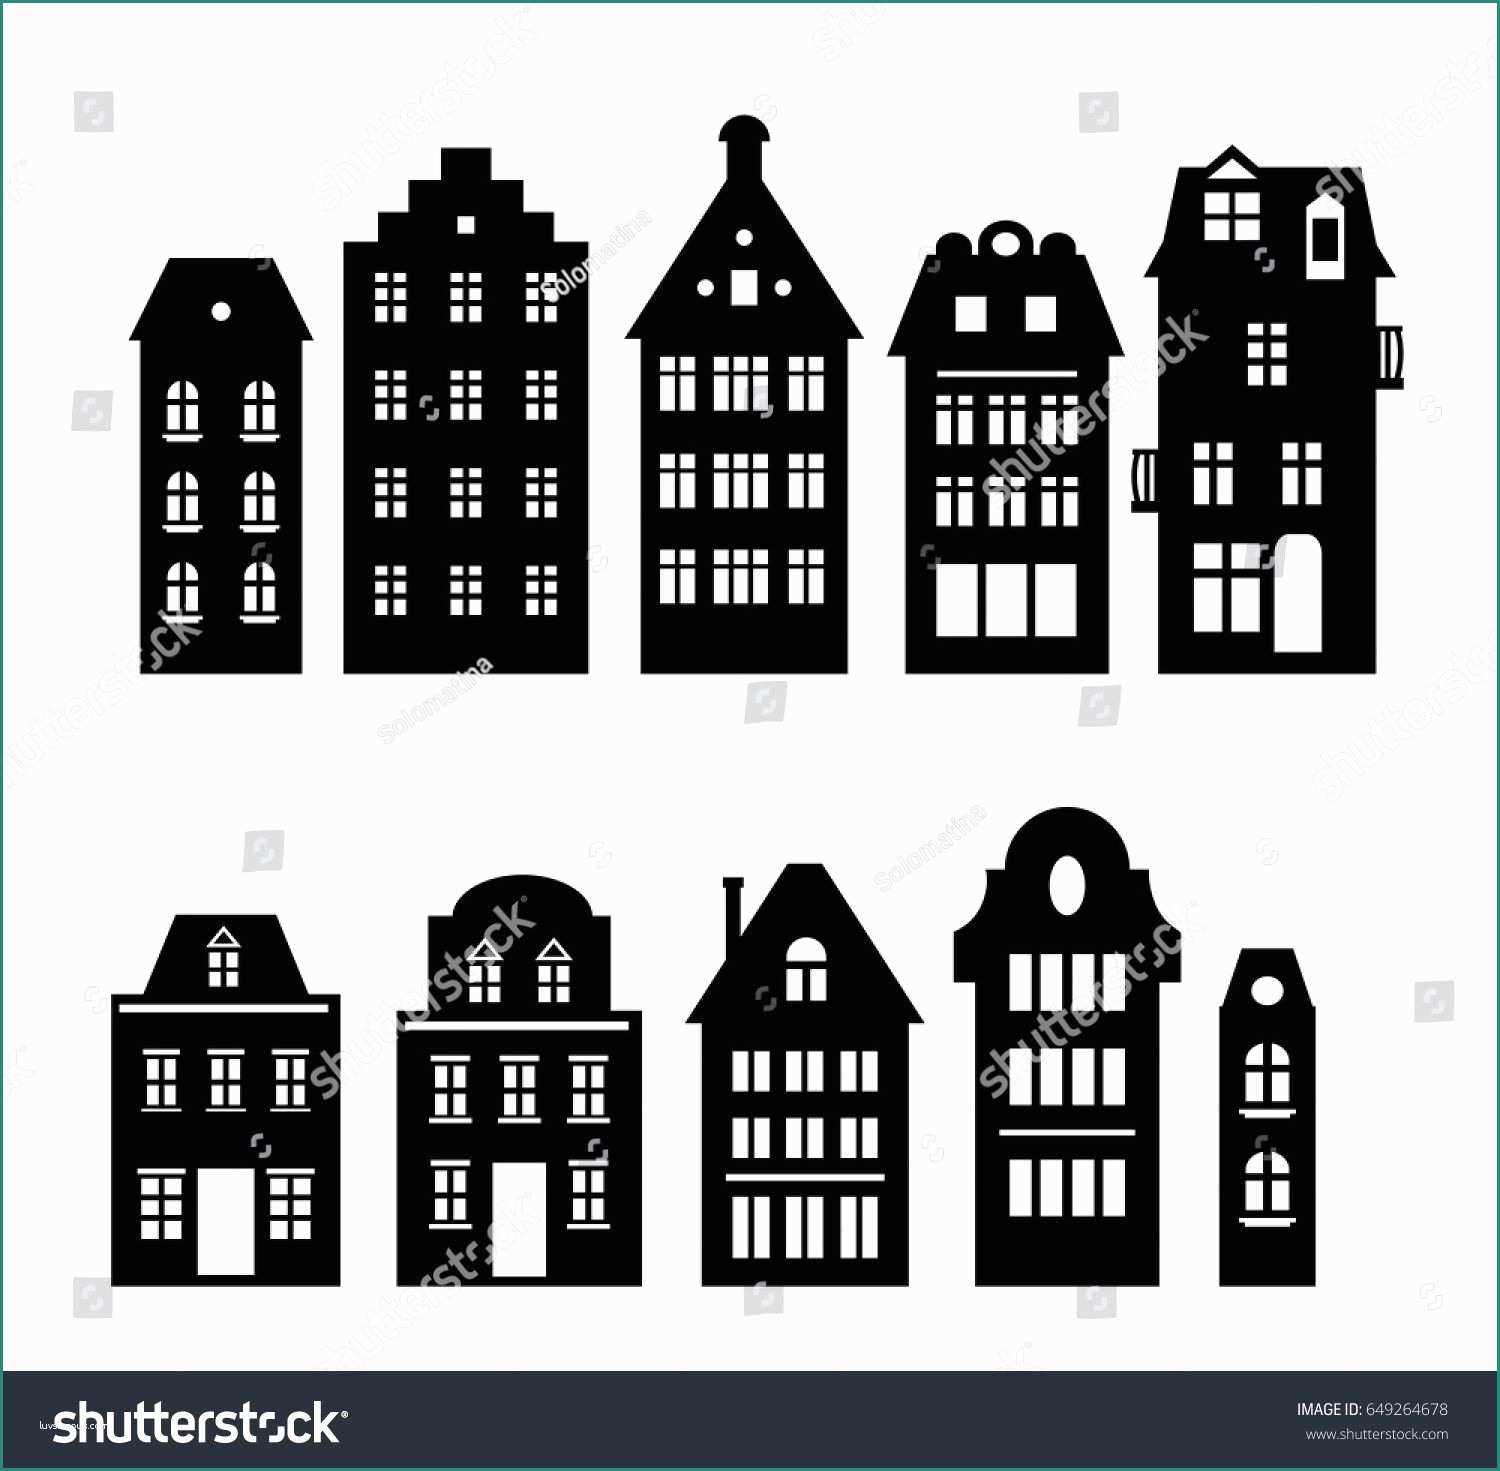 Porte A Libro Dwg E Set Of Laser Cutting Amsterdam Style Houses Silhouette Of A Row Of